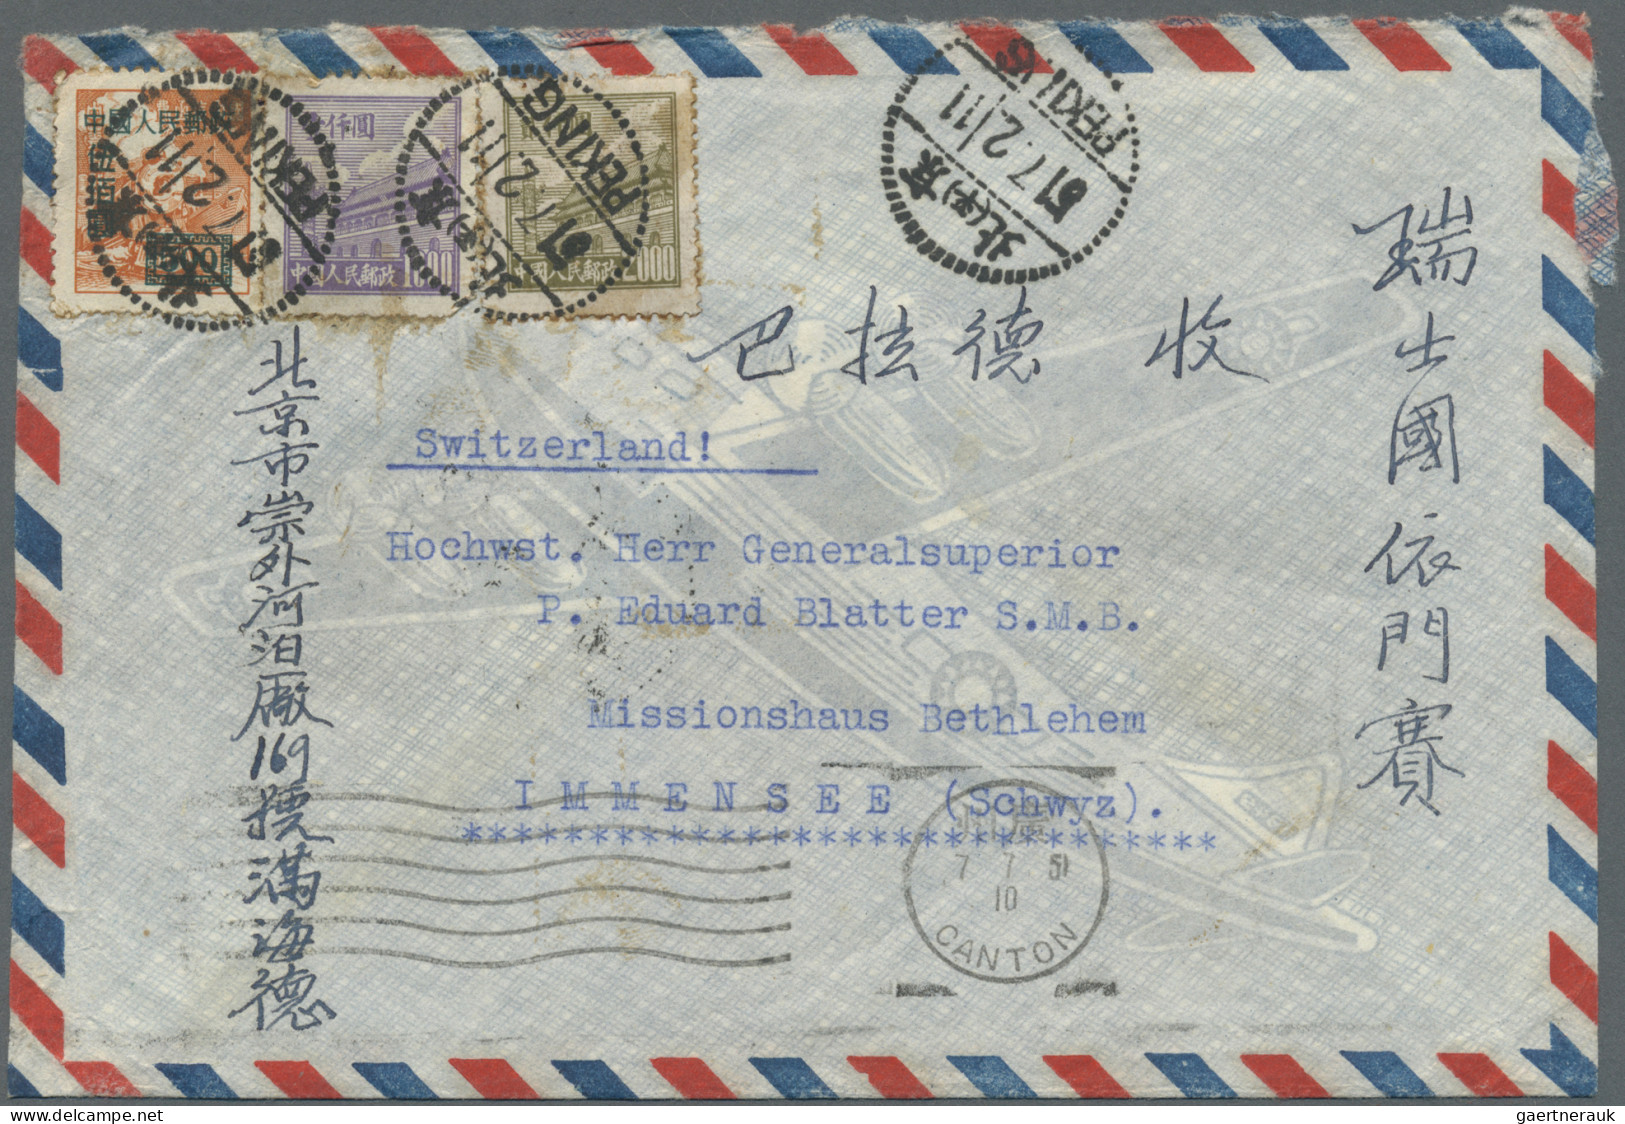 China (PRC): 1950, Tien An Men, Two Small Size Air Mail Covers From "PEKING" Via - Covers & Documents